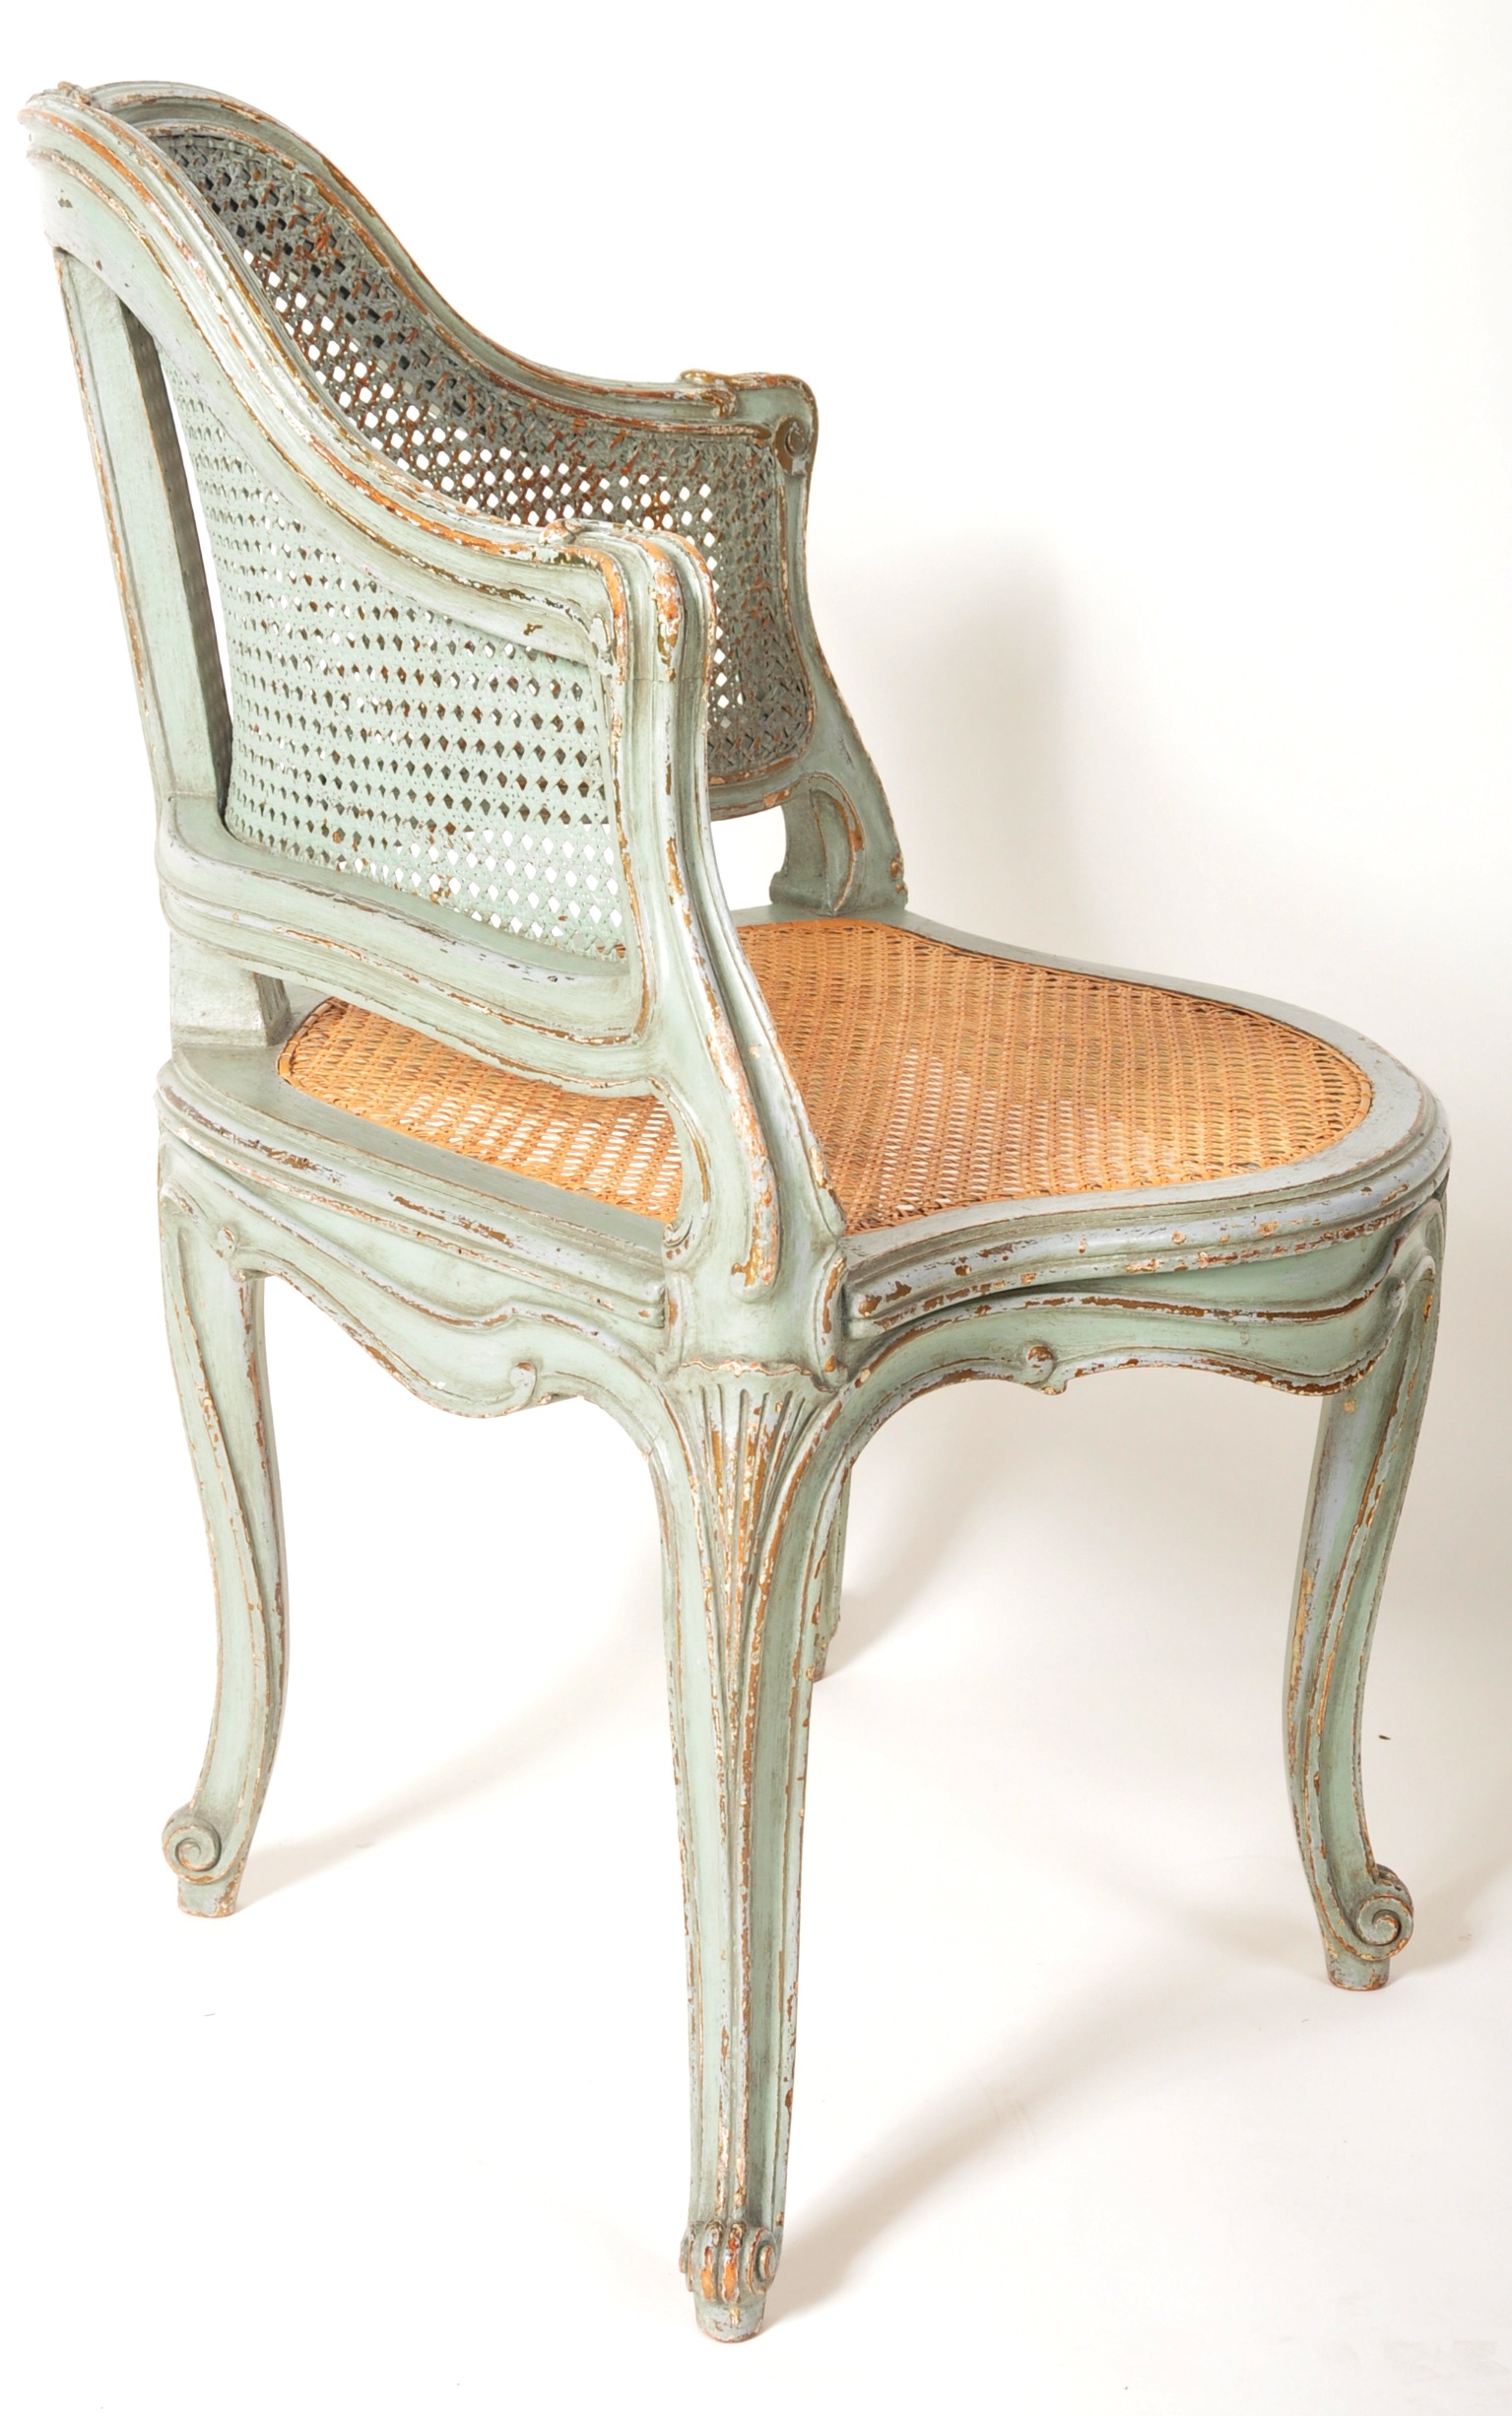 19TH CENTURY FRENCH BERGERE CORNER CHAIR - Image 9 of 13